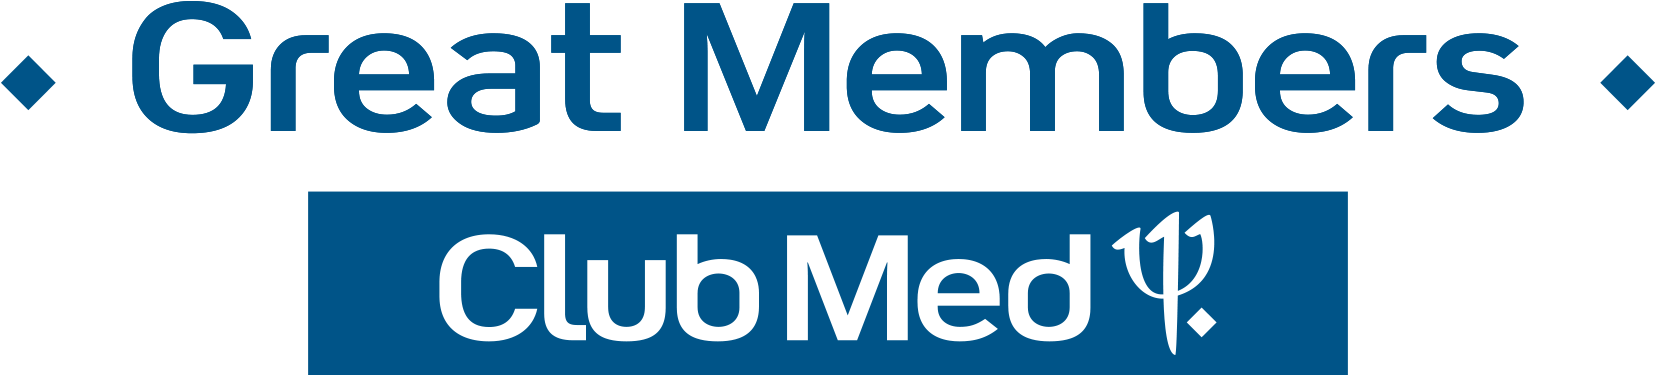 We Treasure Your Clients' Loyalty - Great Members Club Med (2362x1535), Png Download